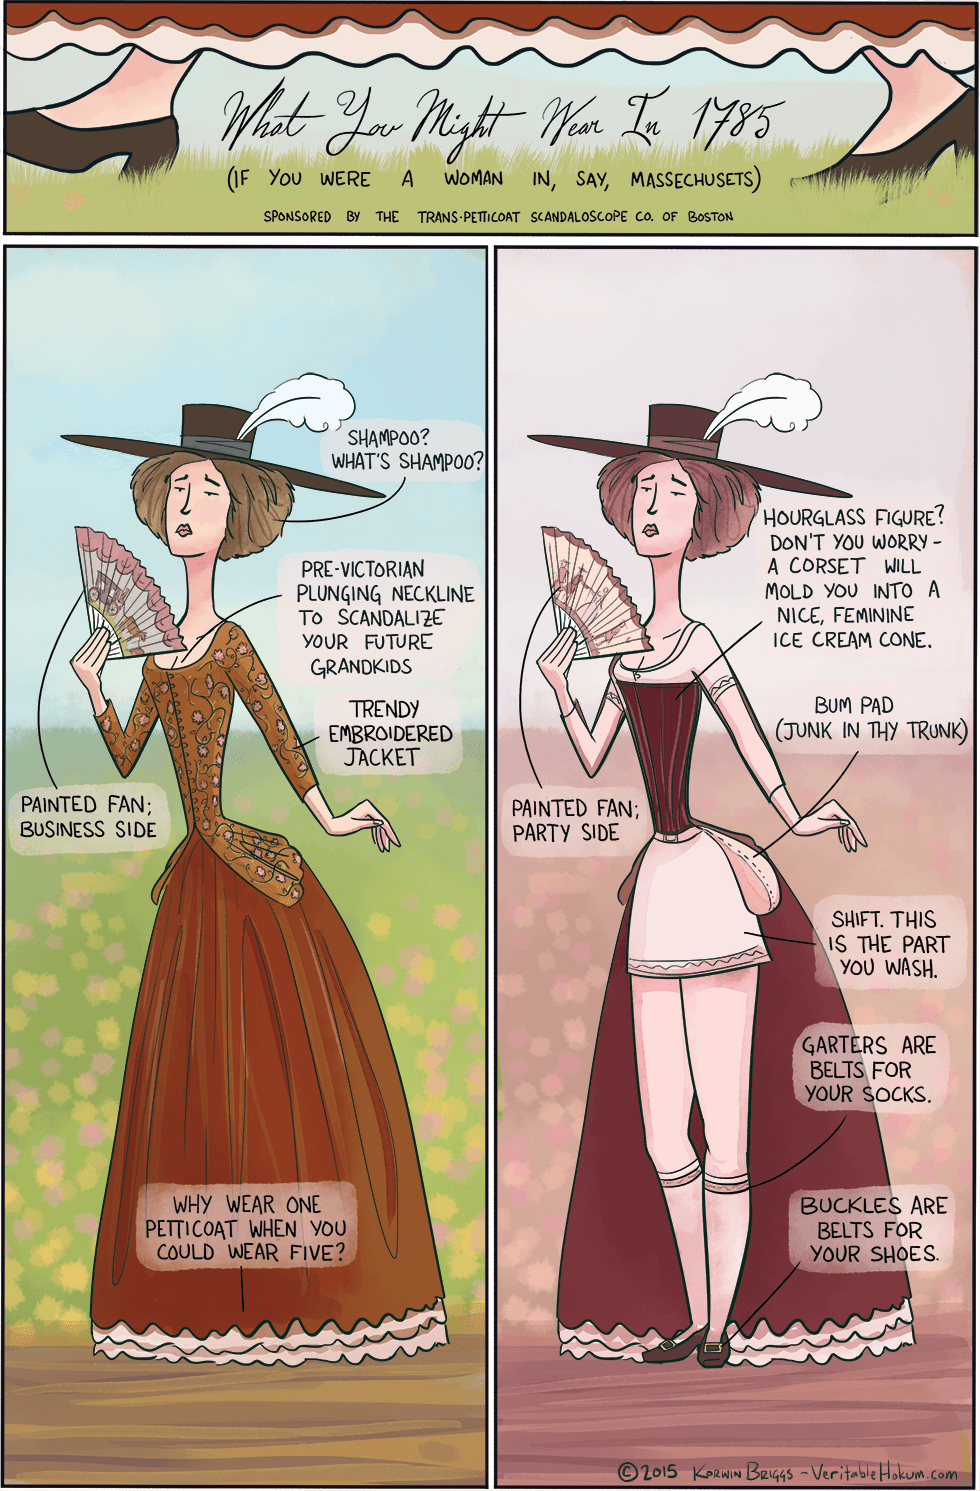 Clothing-1780s-2-small.png